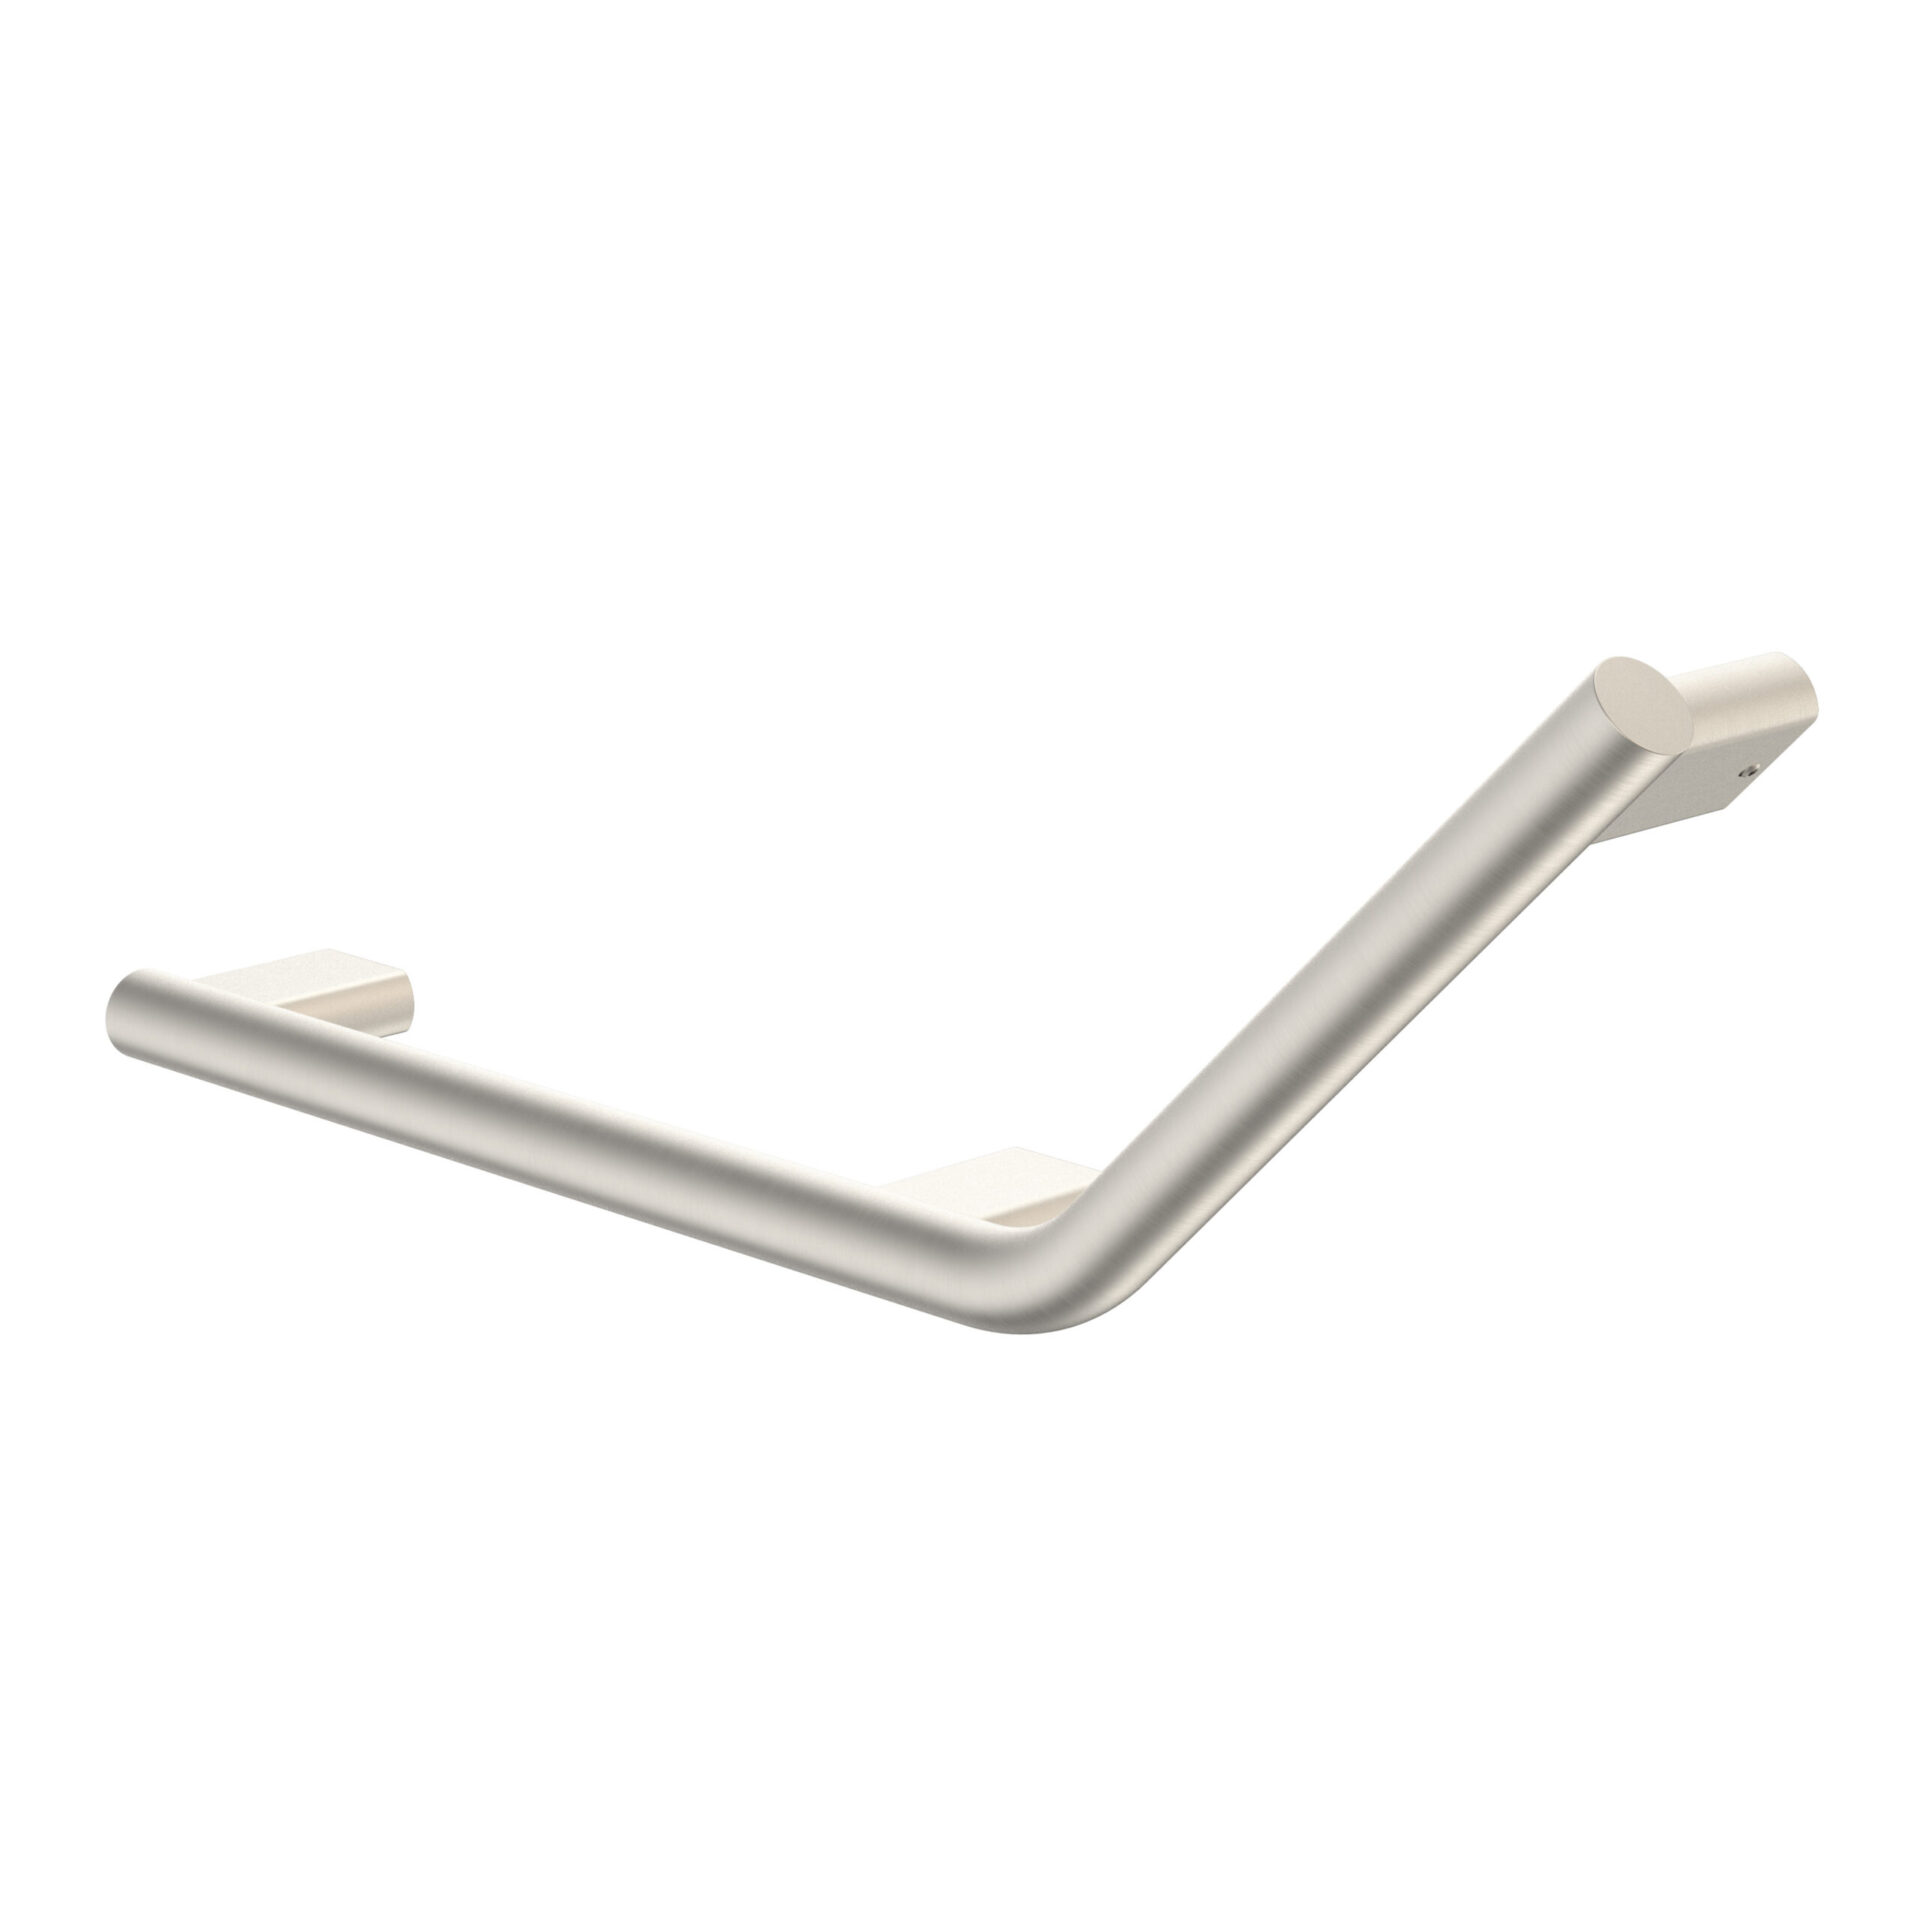 Caroma's stunning and sleek range of Opal Support Rails are designed for assisted living in the home and in Aged Care. The rails improve bathroom safety and independence by providing additional support and balance assistance